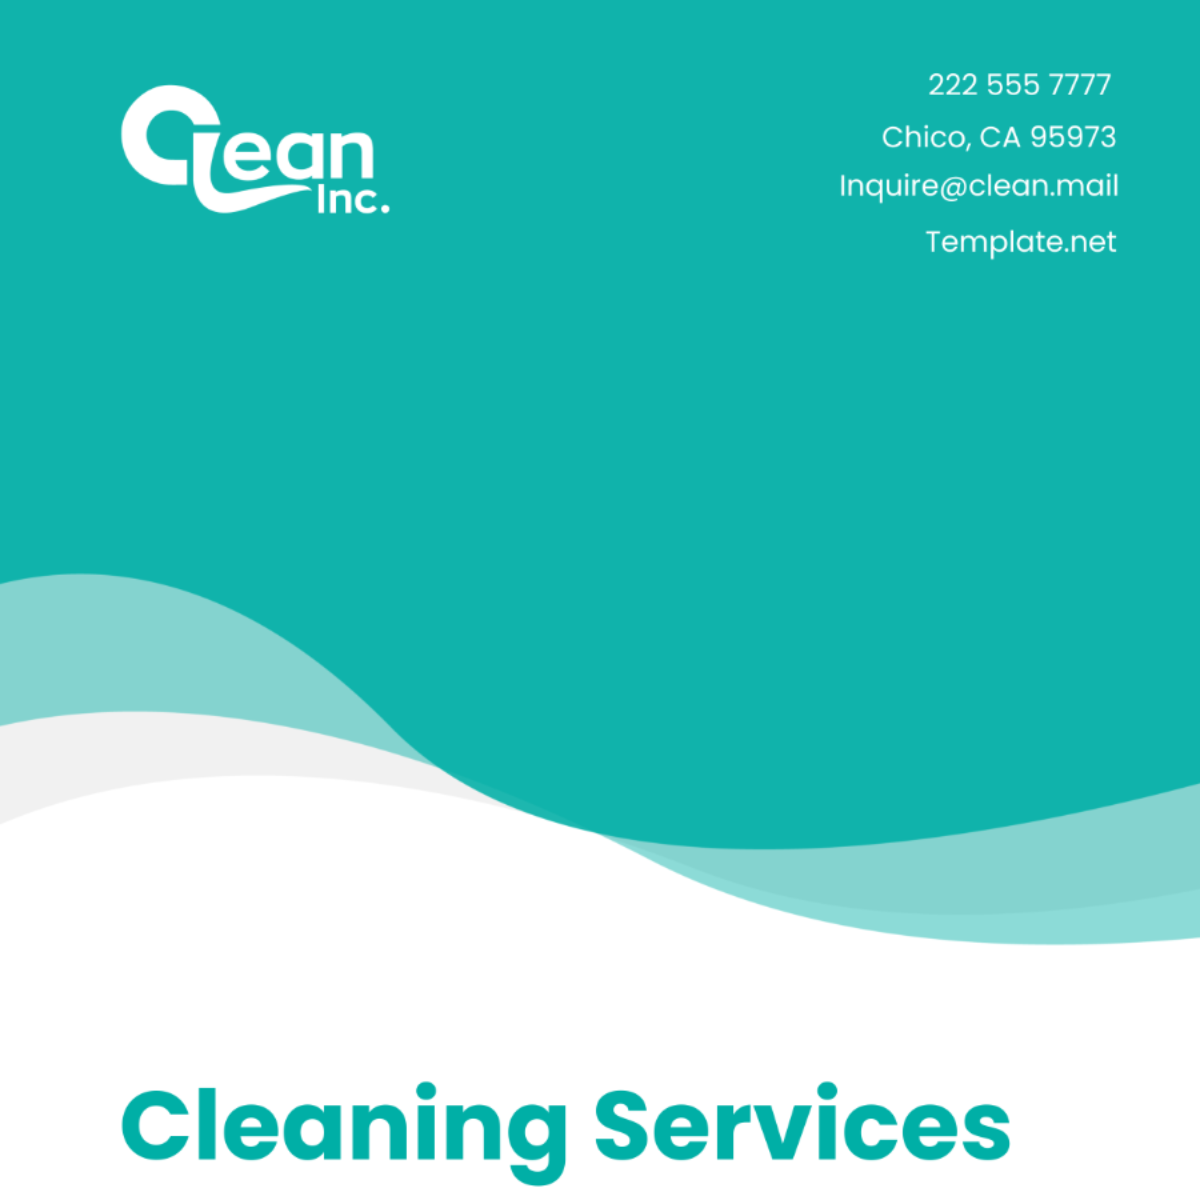 Free Cleaning Services Operations Manager Job Contract Template